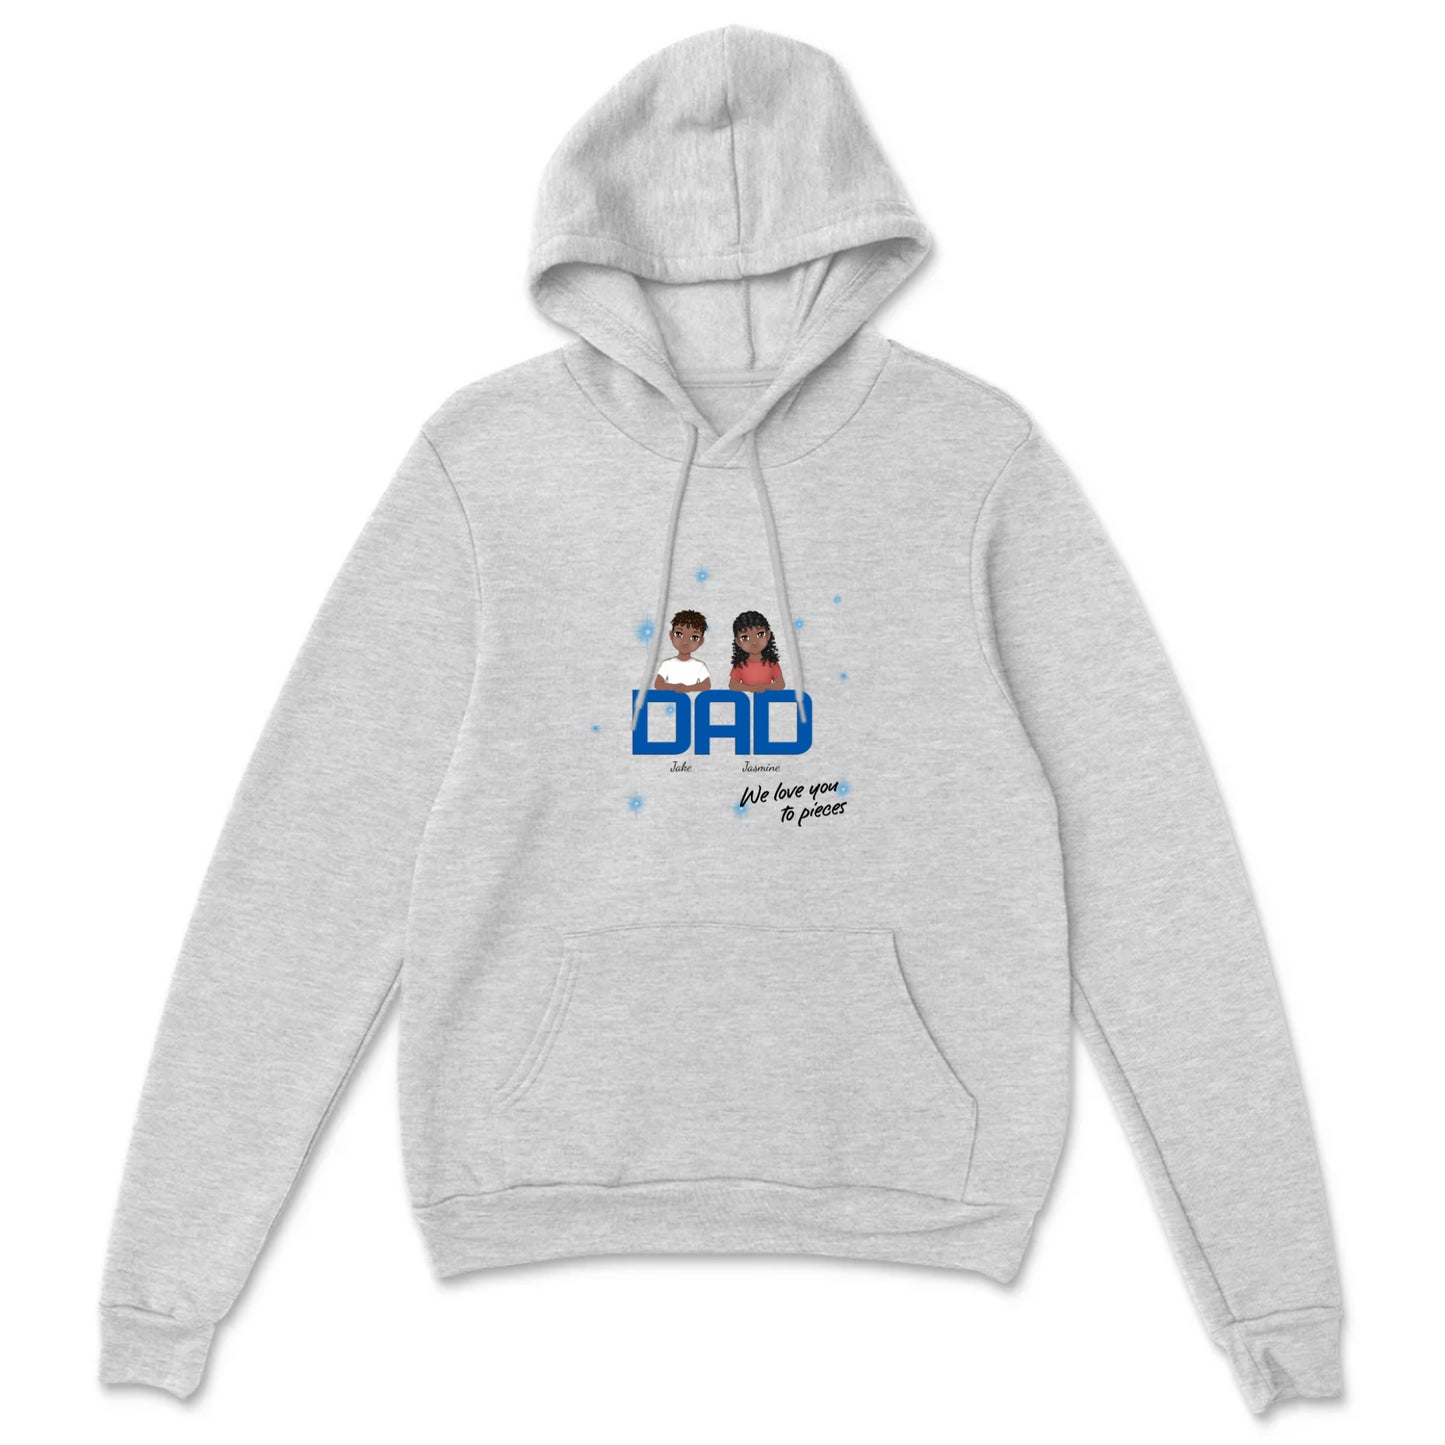 DAD Custom and Personalized Pullover Hoodie